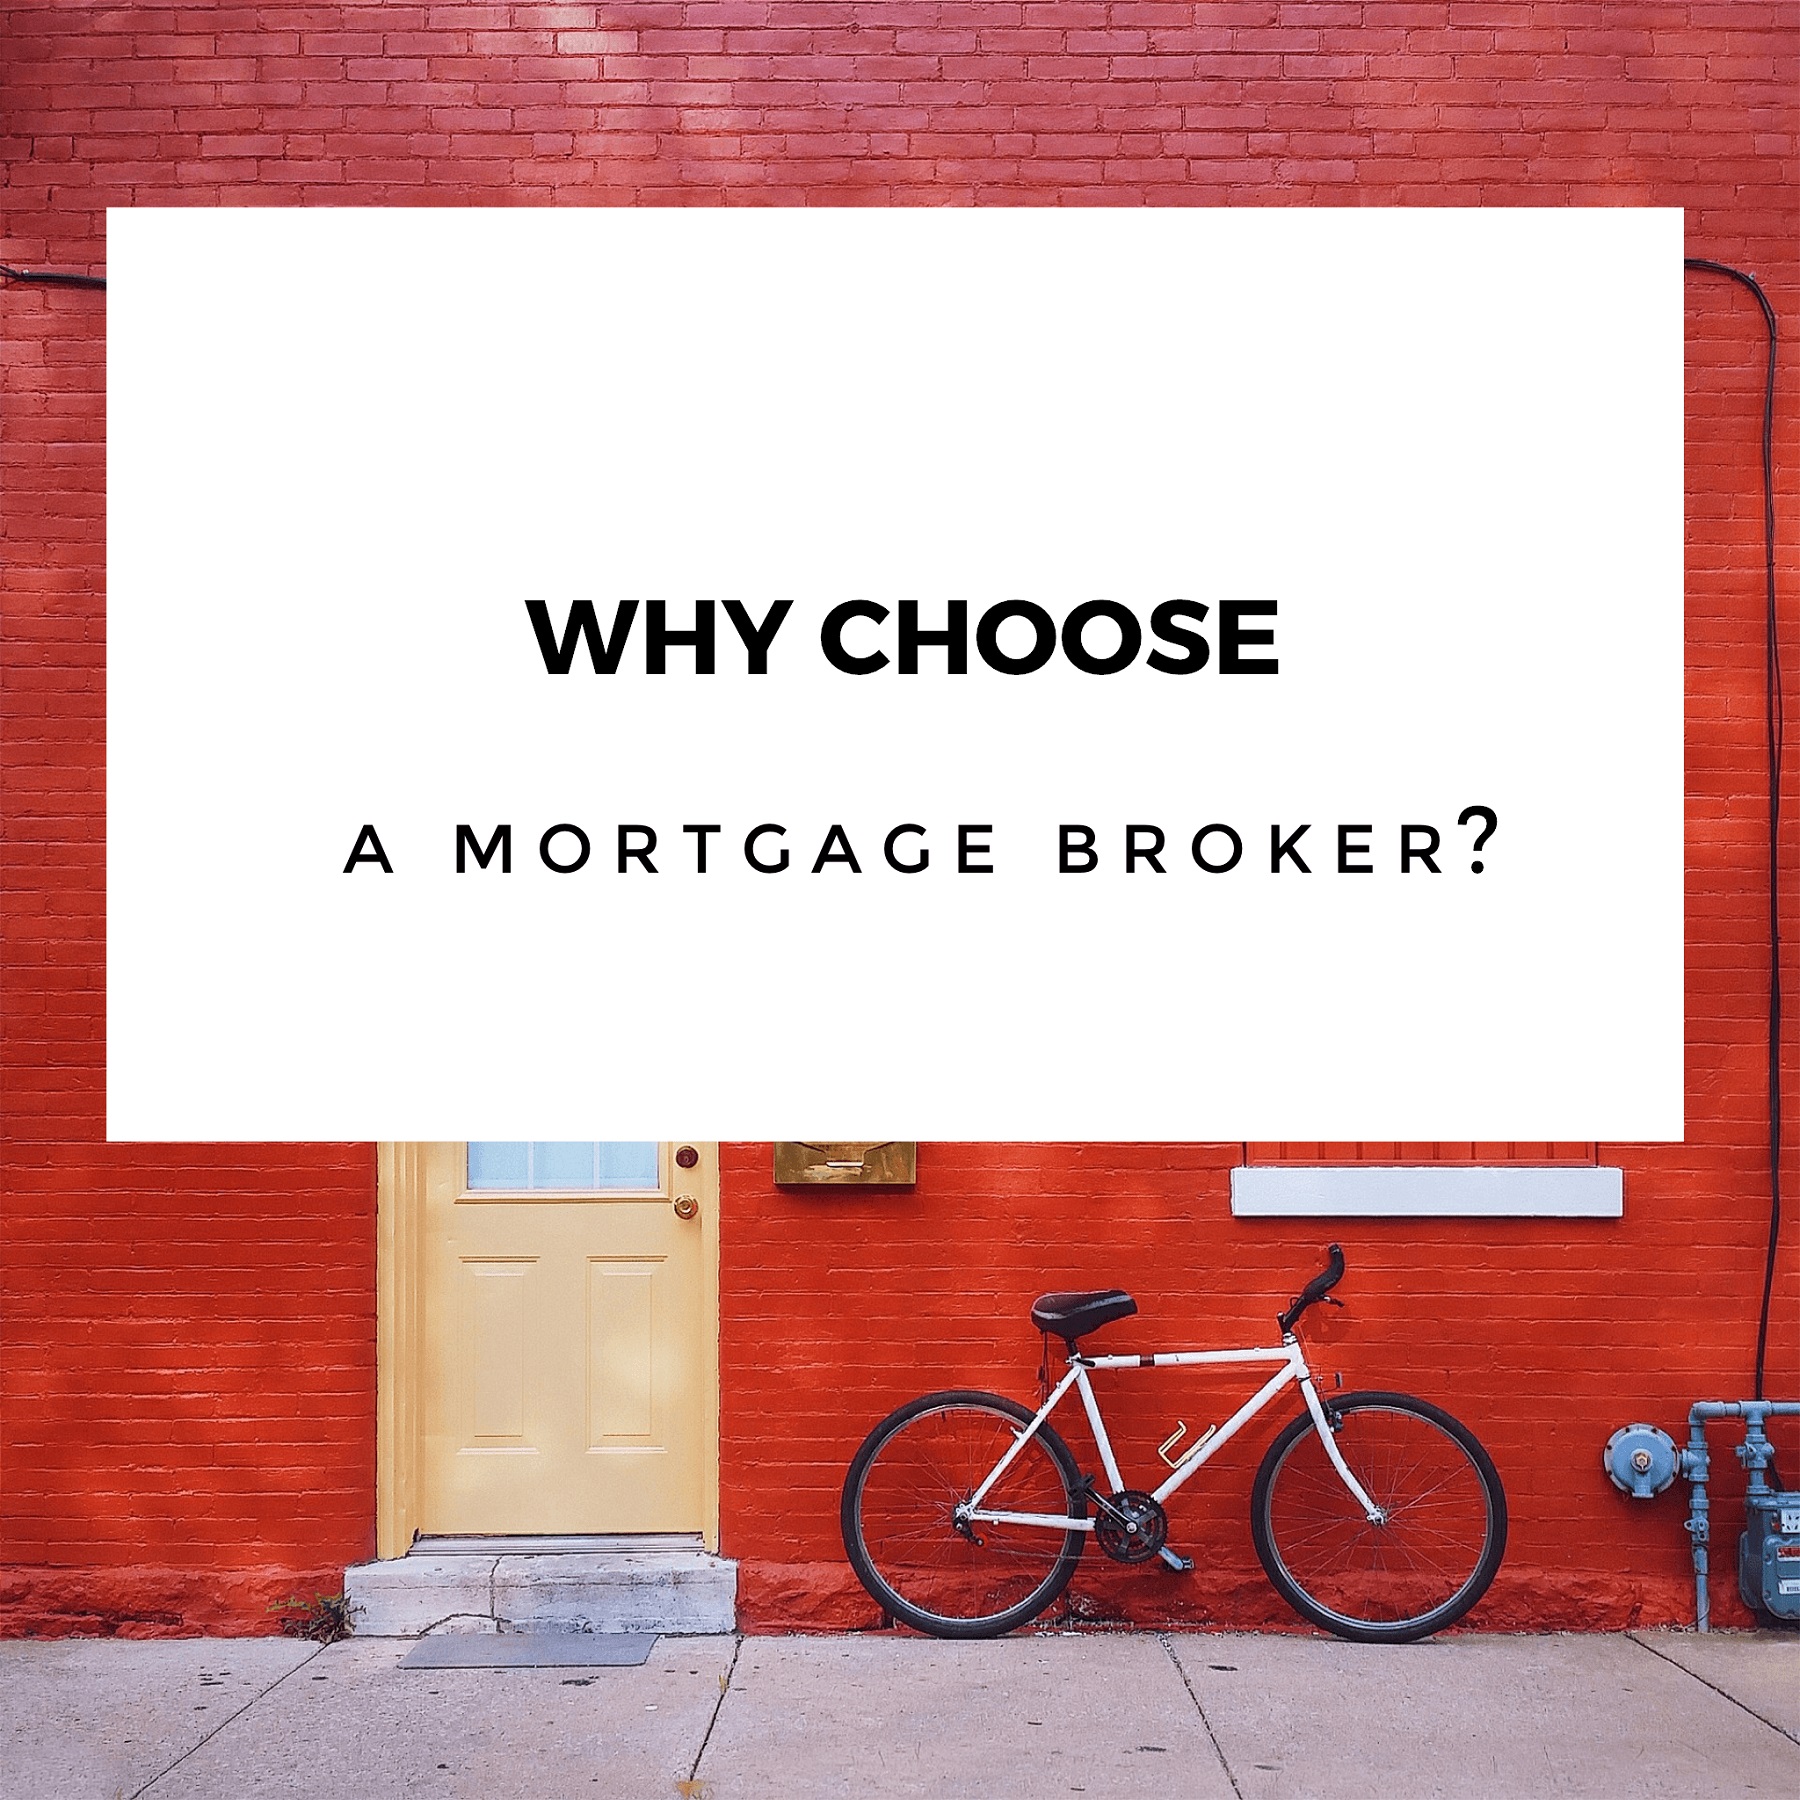 Why choose a Mortgage Broker?